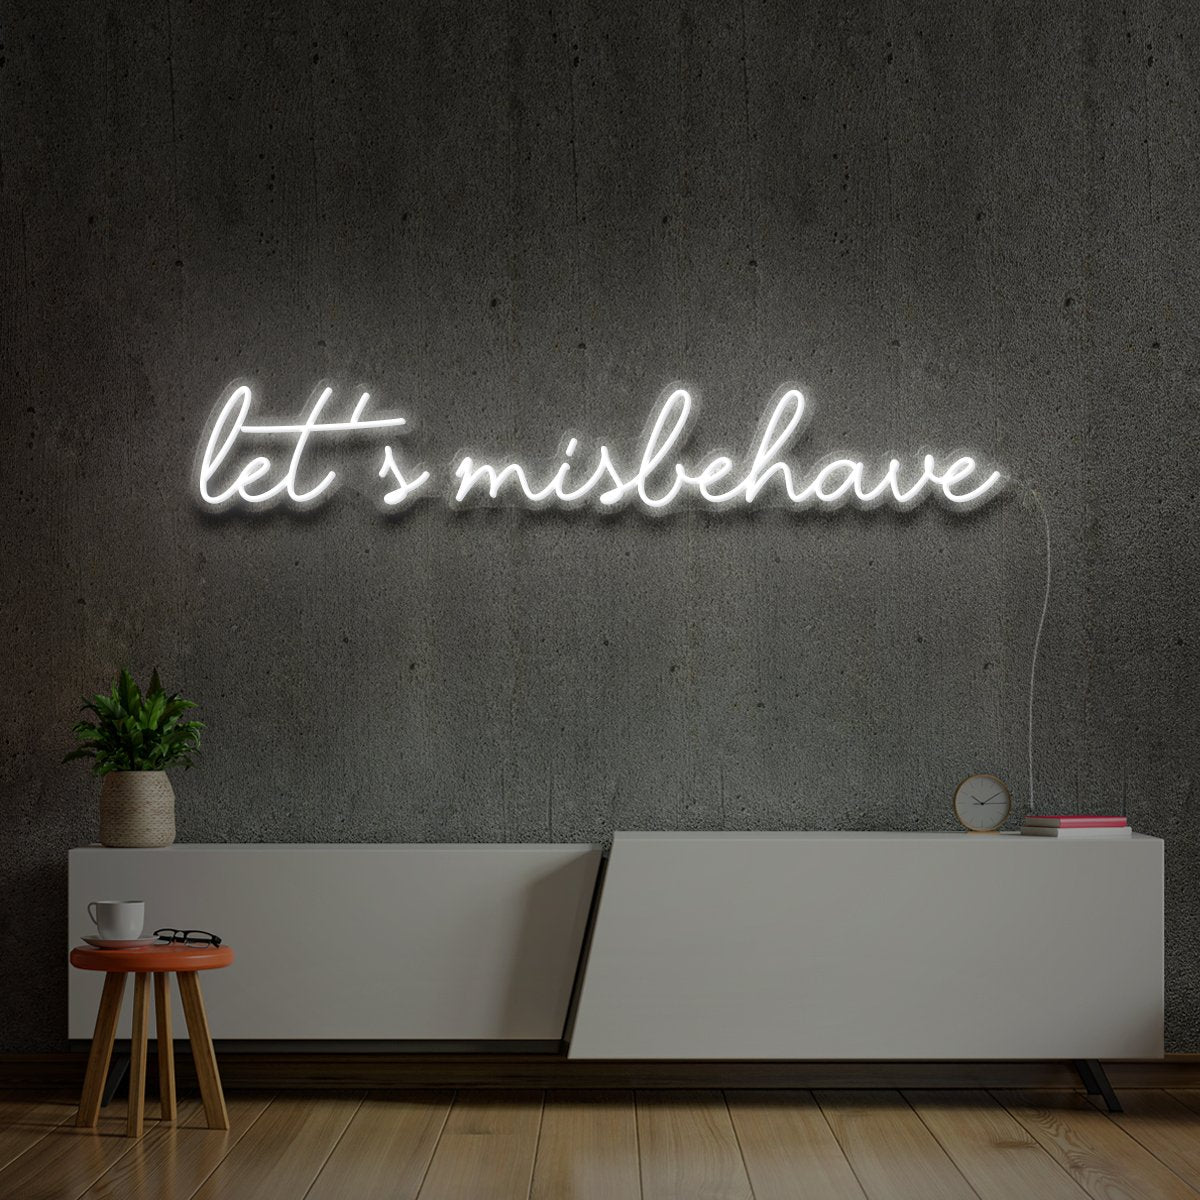 "Let's Misbehave" Neon Sign